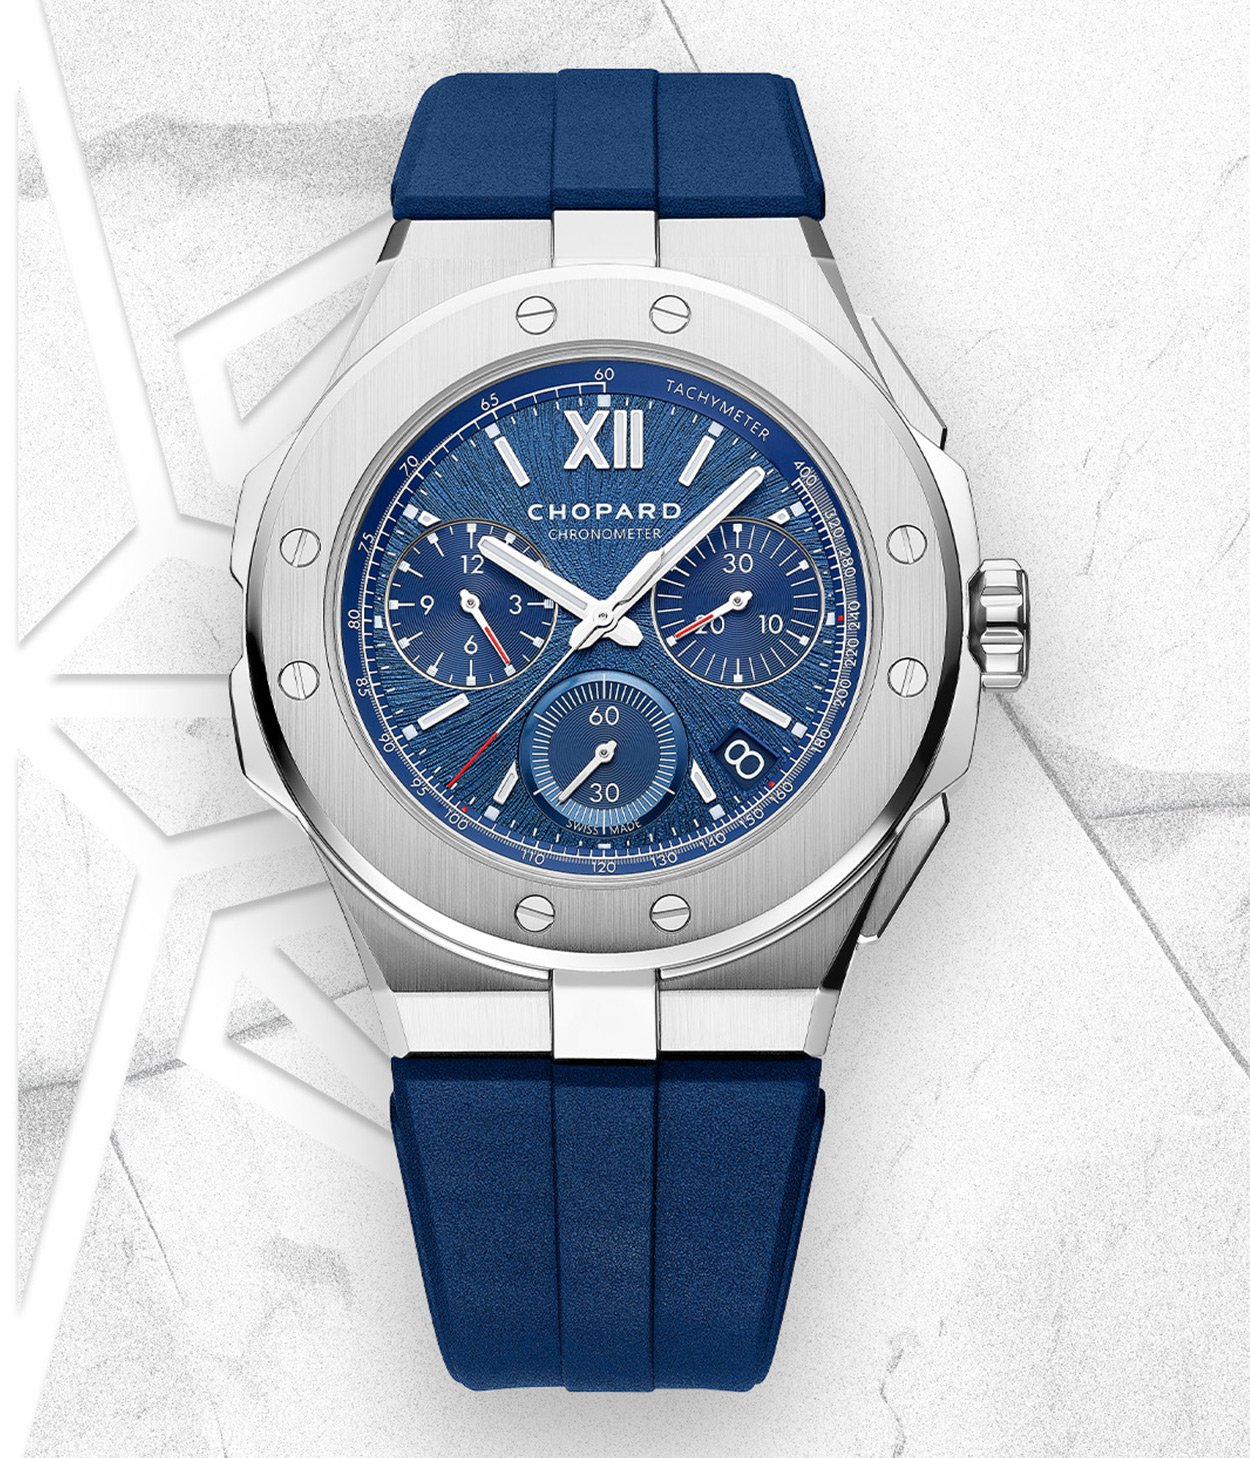 Discover Inherent Majesty with Chopard’s Alpine Eagle Watch Collection